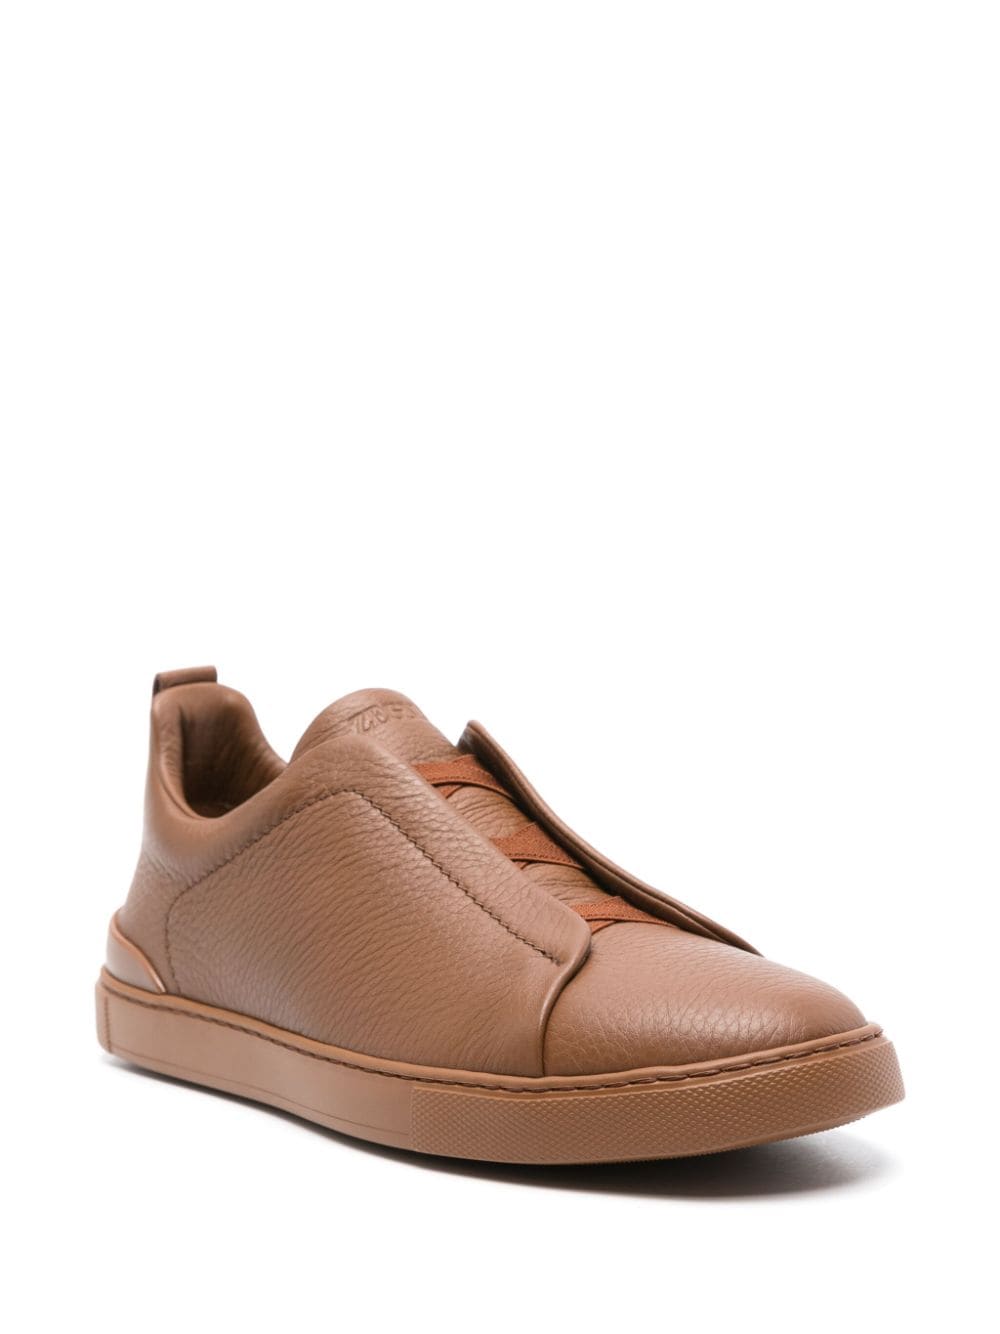 Zegna leather slip-on sneakers - Bruin